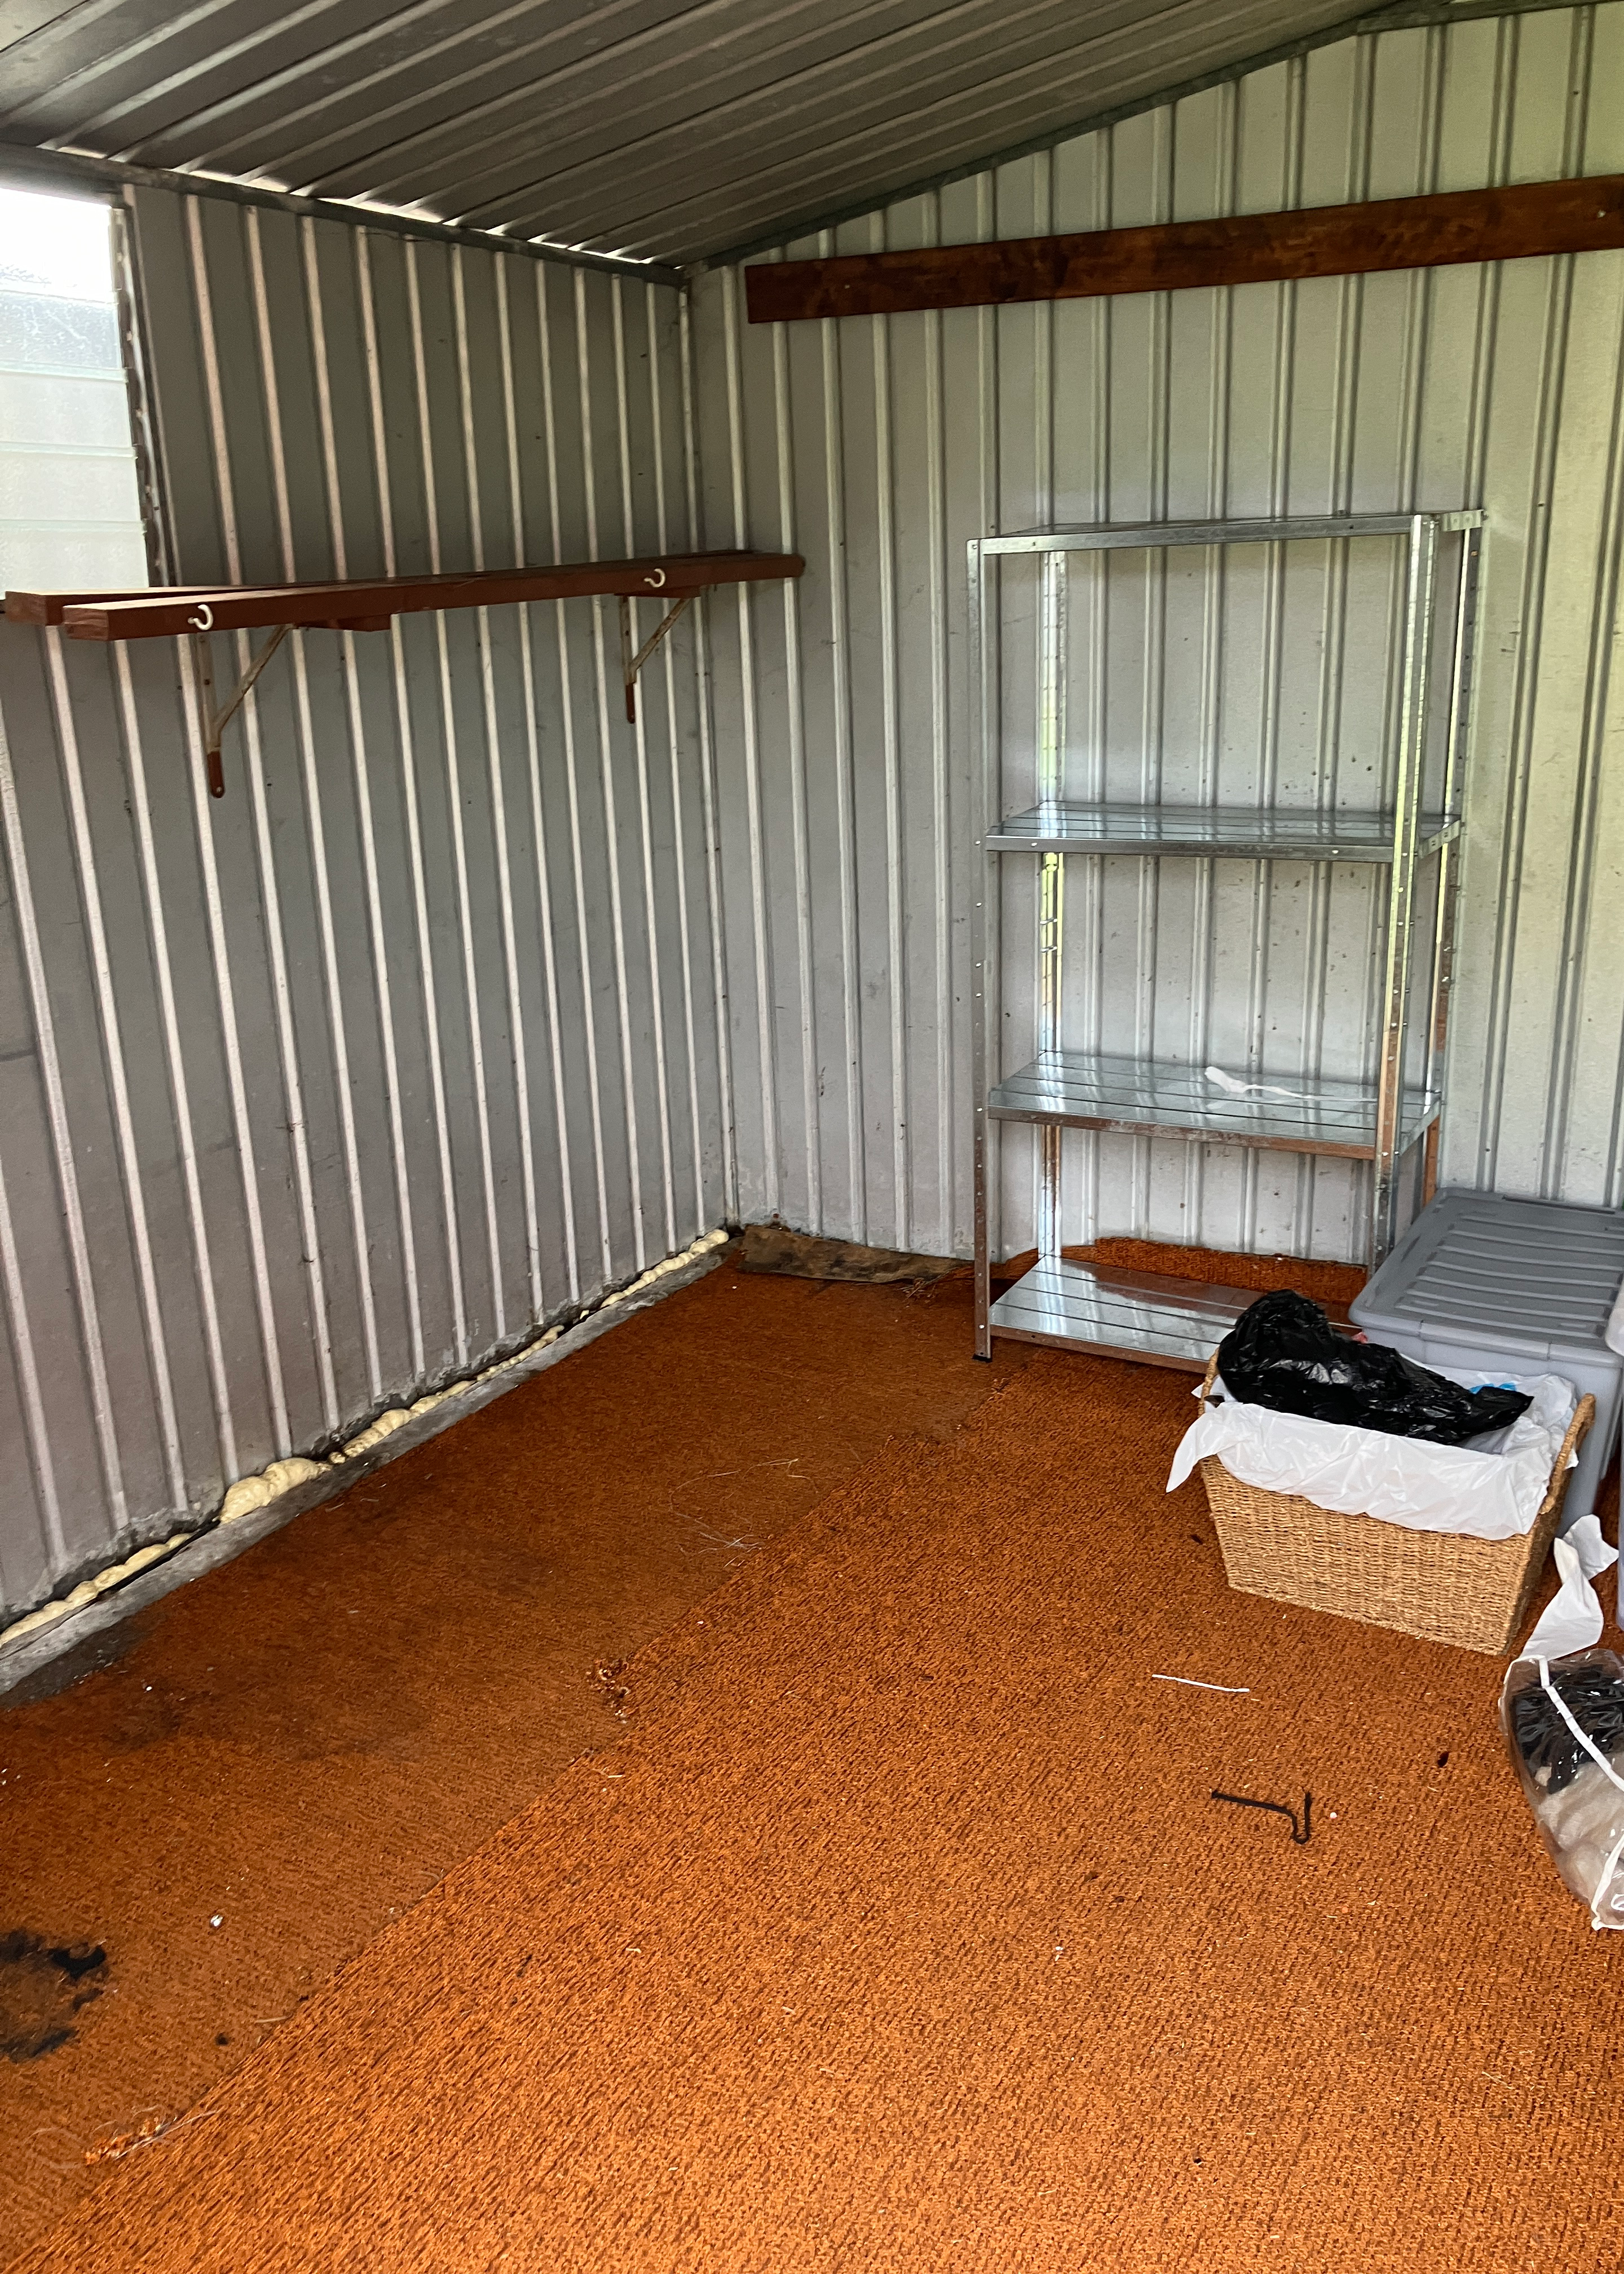 Decluttered storage shed with old flooring